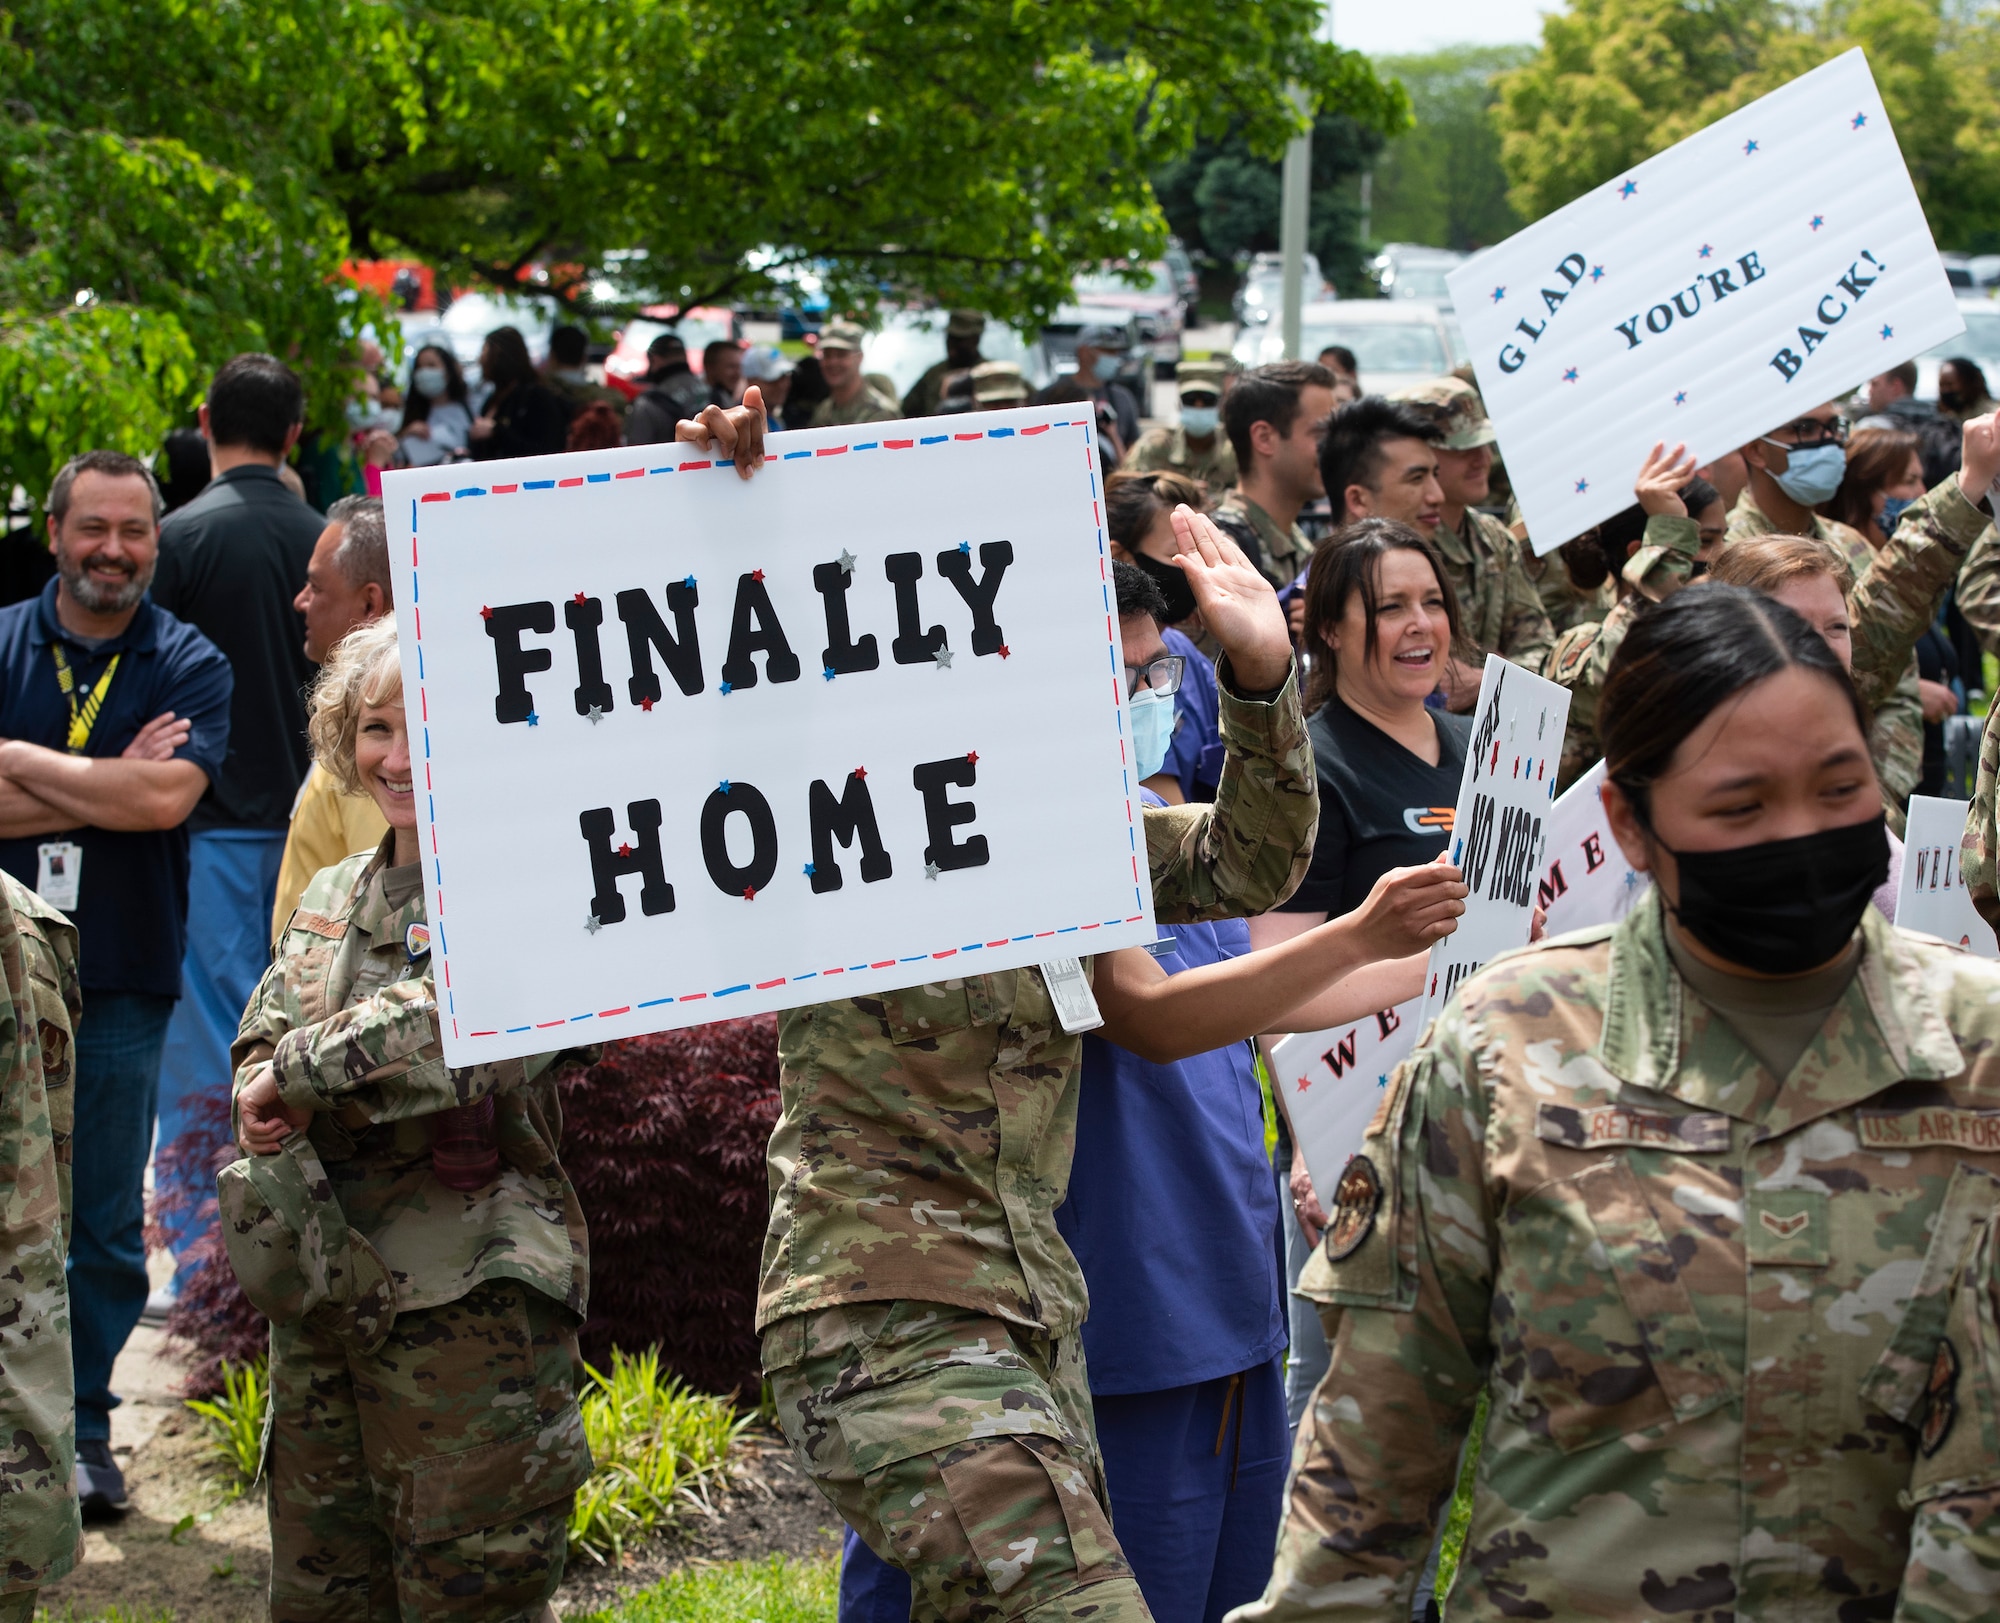 88th Medical Group Airmen gather May 18, 2021, at the Wright- Patterson Air Force Base, Ohio, Medical Center to welcome home friends and coworkers returning from atwo-month deployment to Detroit . The returning Airmen helped administer more than 200,000 doses of the COVID-19 vaccineto Michigan residents. (U.S. Air Force photo by R.J. Oriez)